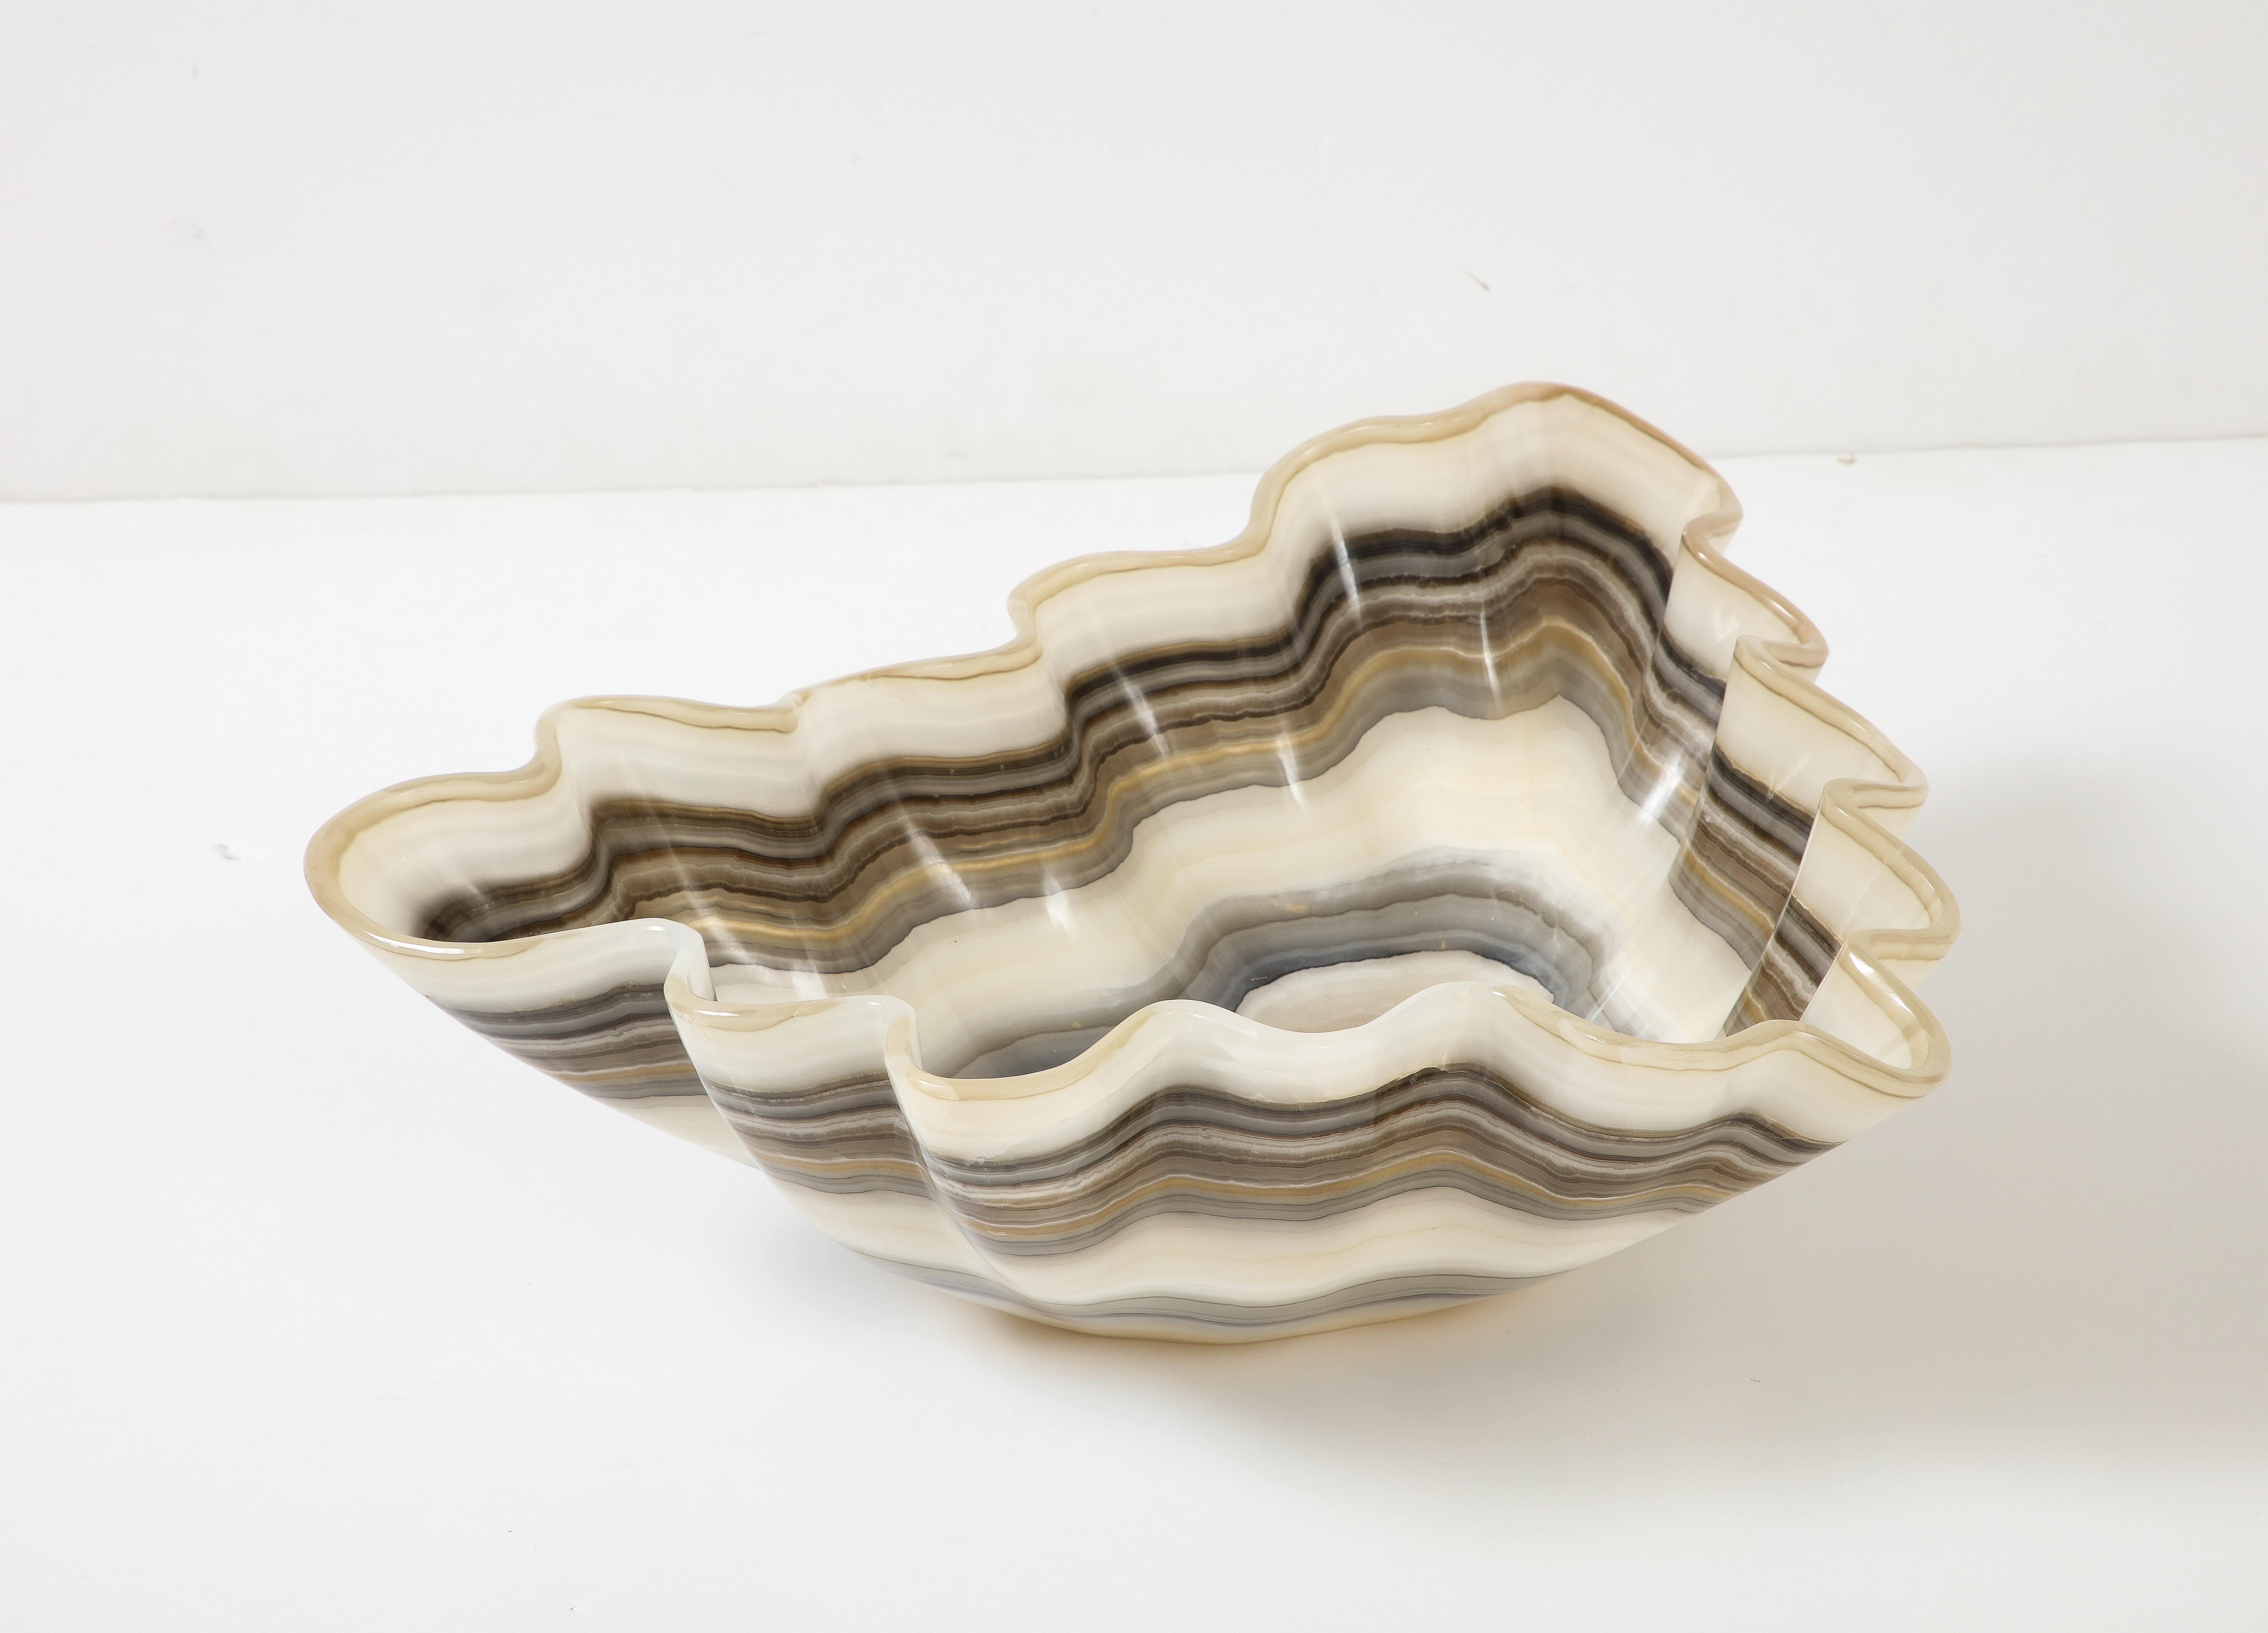 A hand carved polished onyx bowl or centerpiece in an impressive size with a scalloped edge banded with undulating rings of cream, taupe, dark brown, beige, tan, gray and charcoal. Utilitarian and stunning, this centerpiece works with a variety of